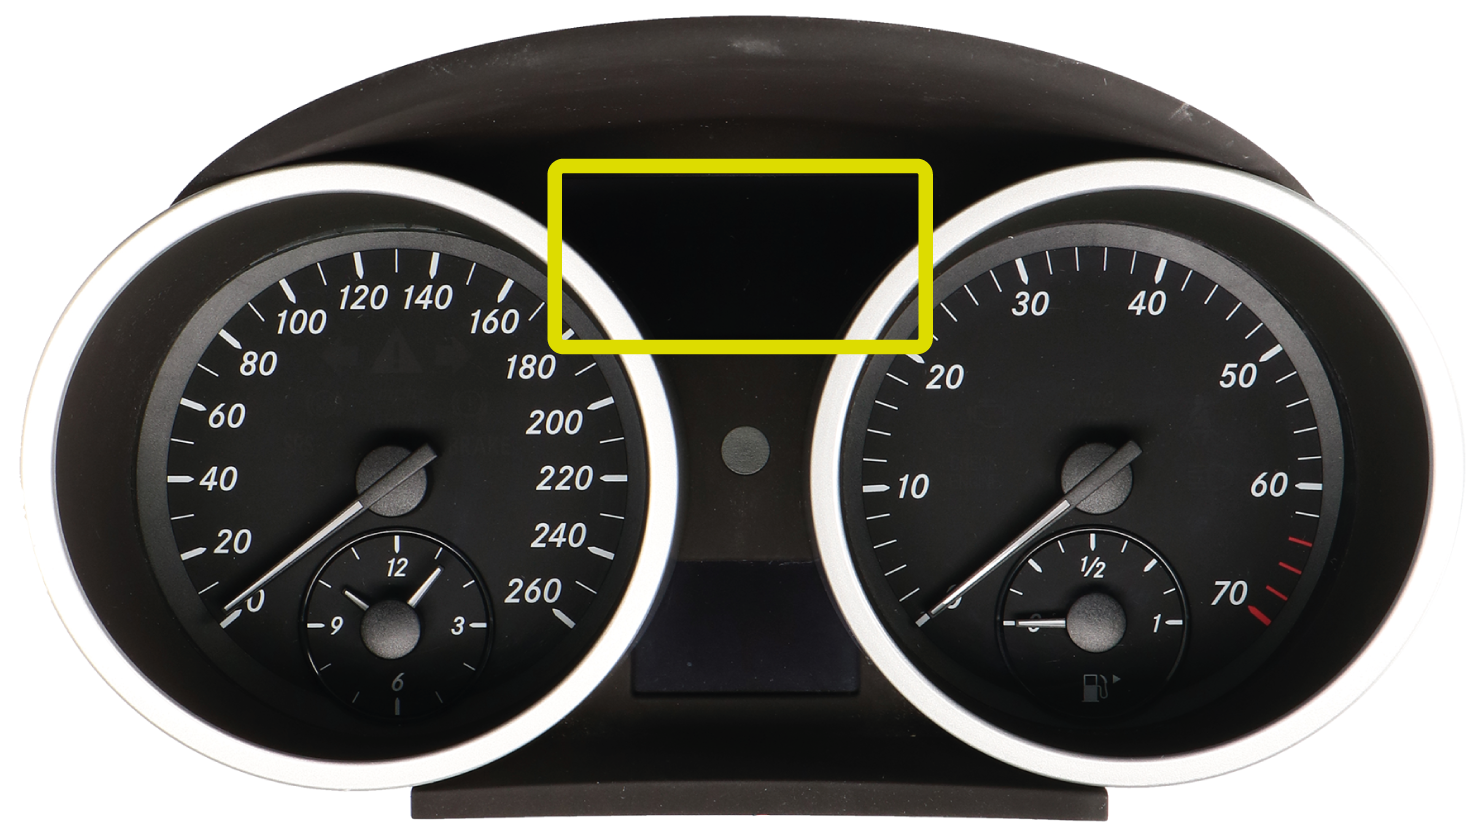 Collocation of the top display of Mercedes-Benz SLK-Class R171 instrument clusters